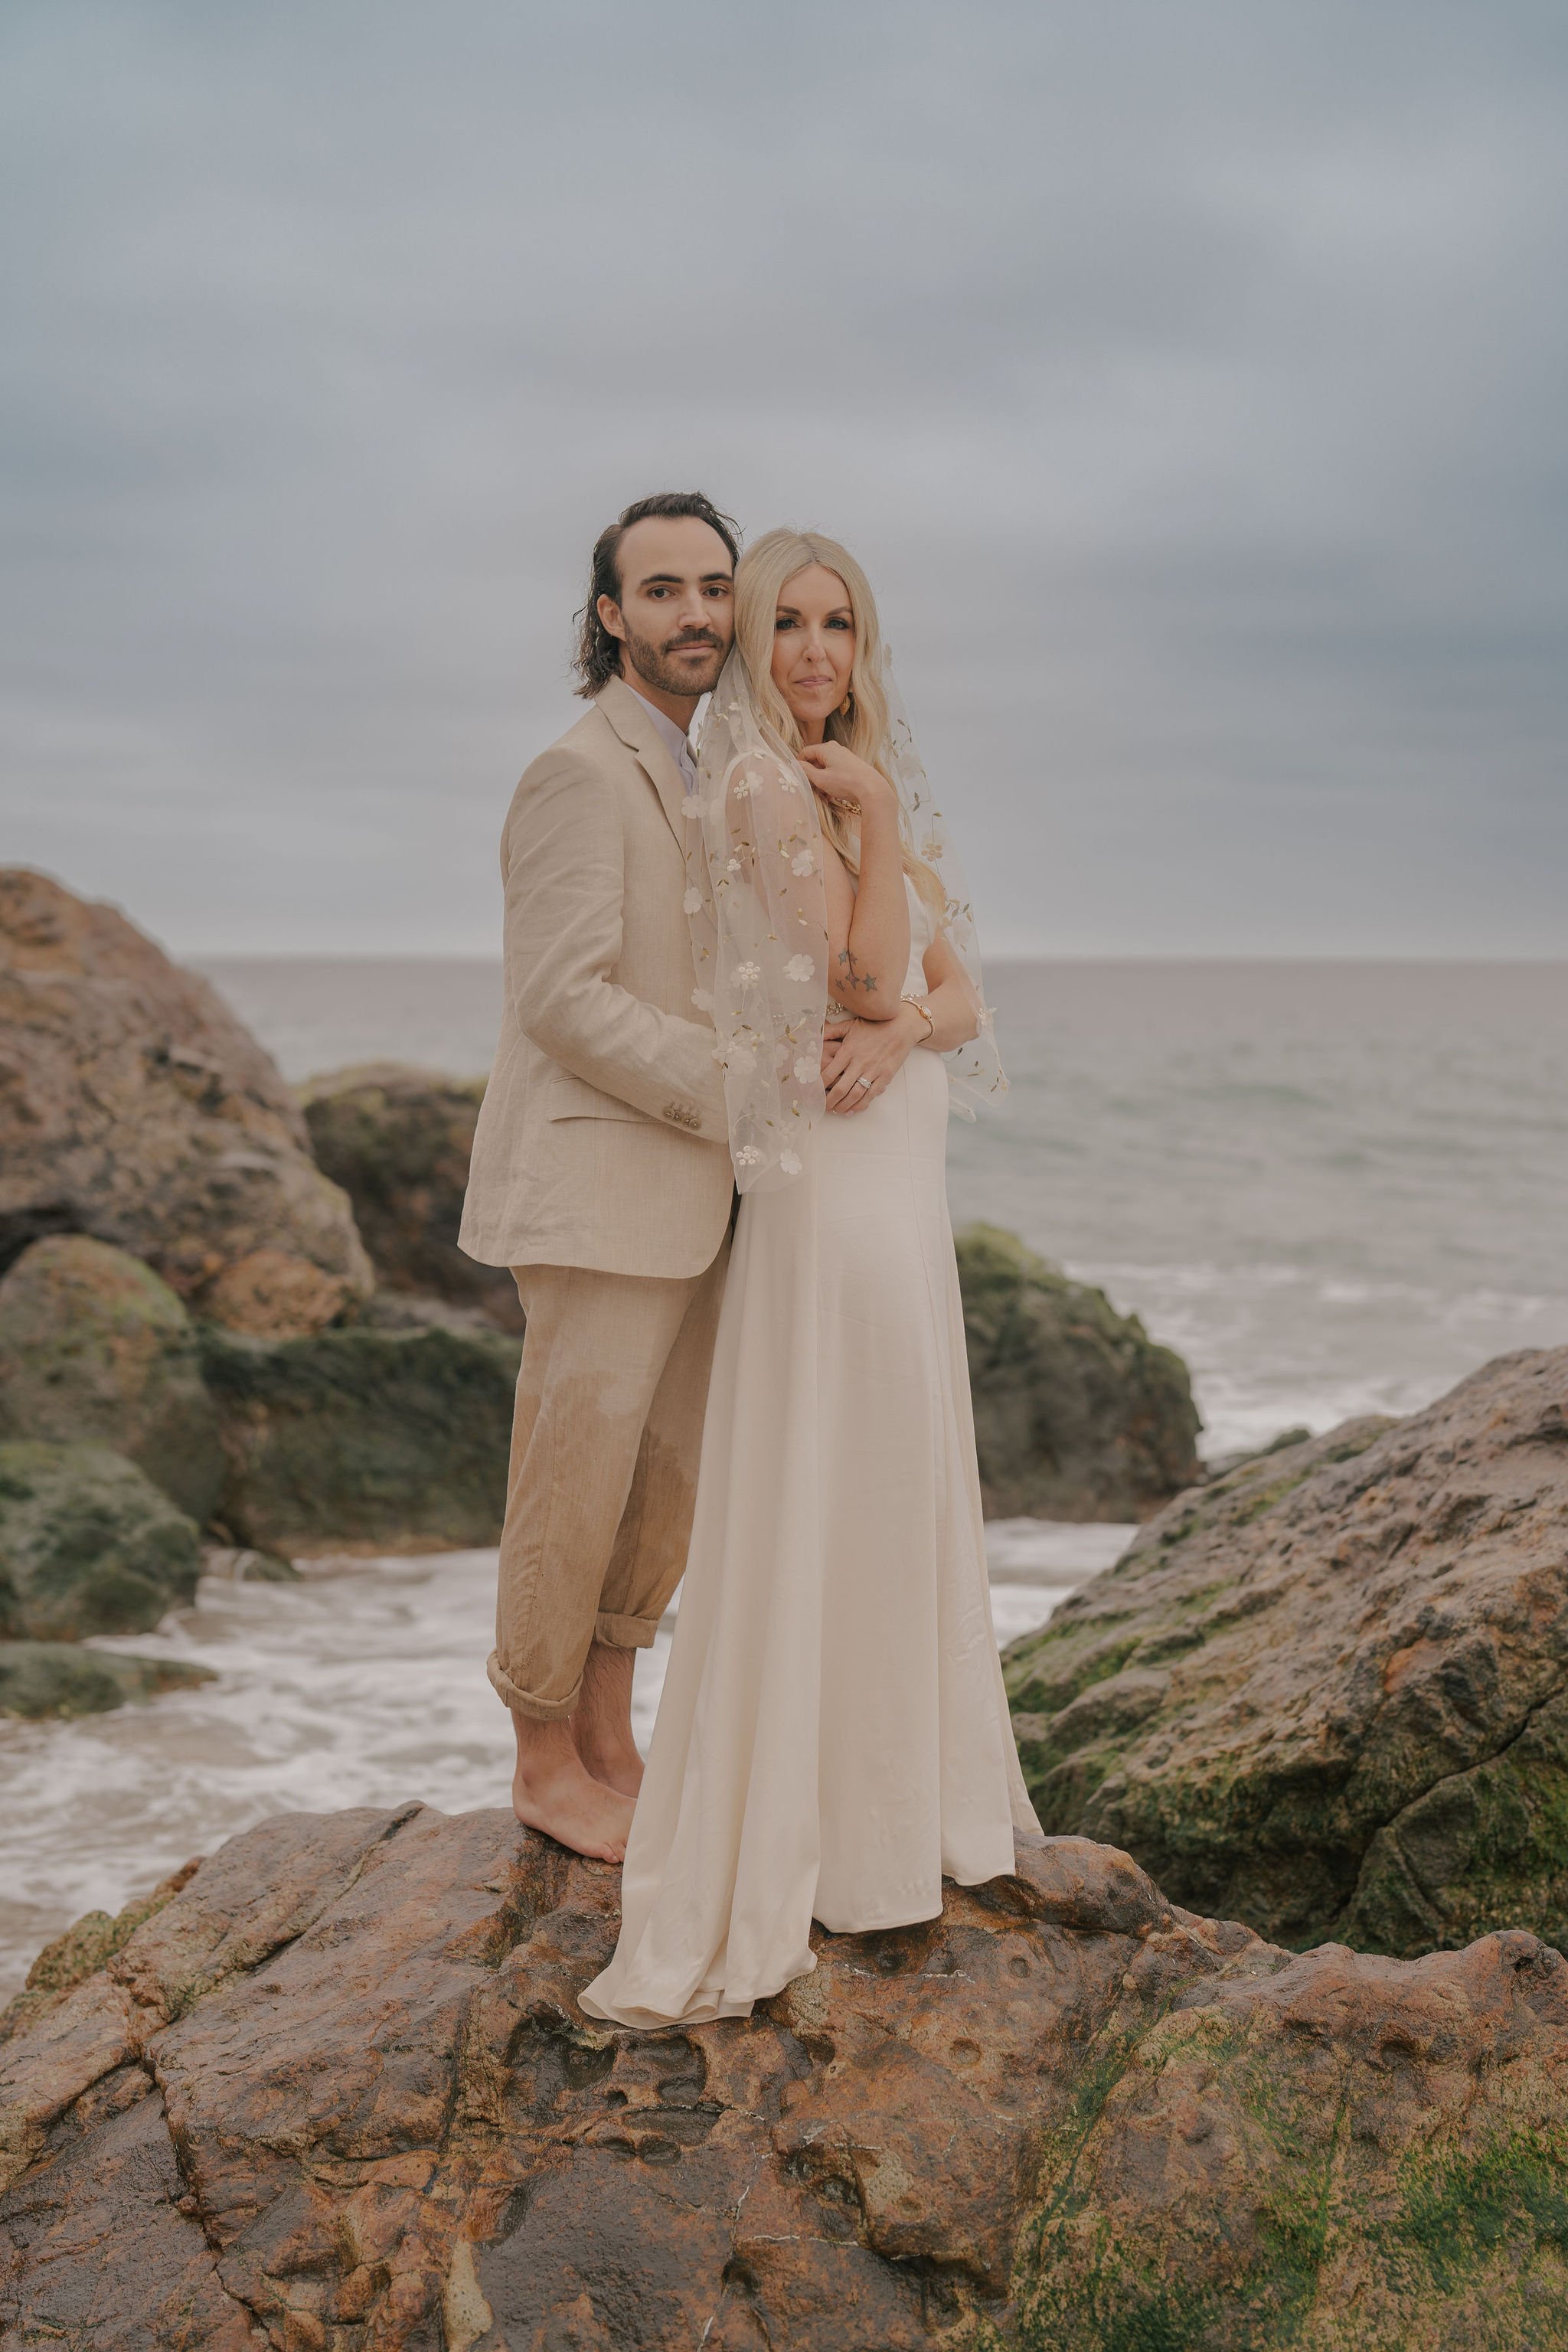 founder, podcast host, and manifestation coach plans wedding along the cliffs of point dume beach in malibu